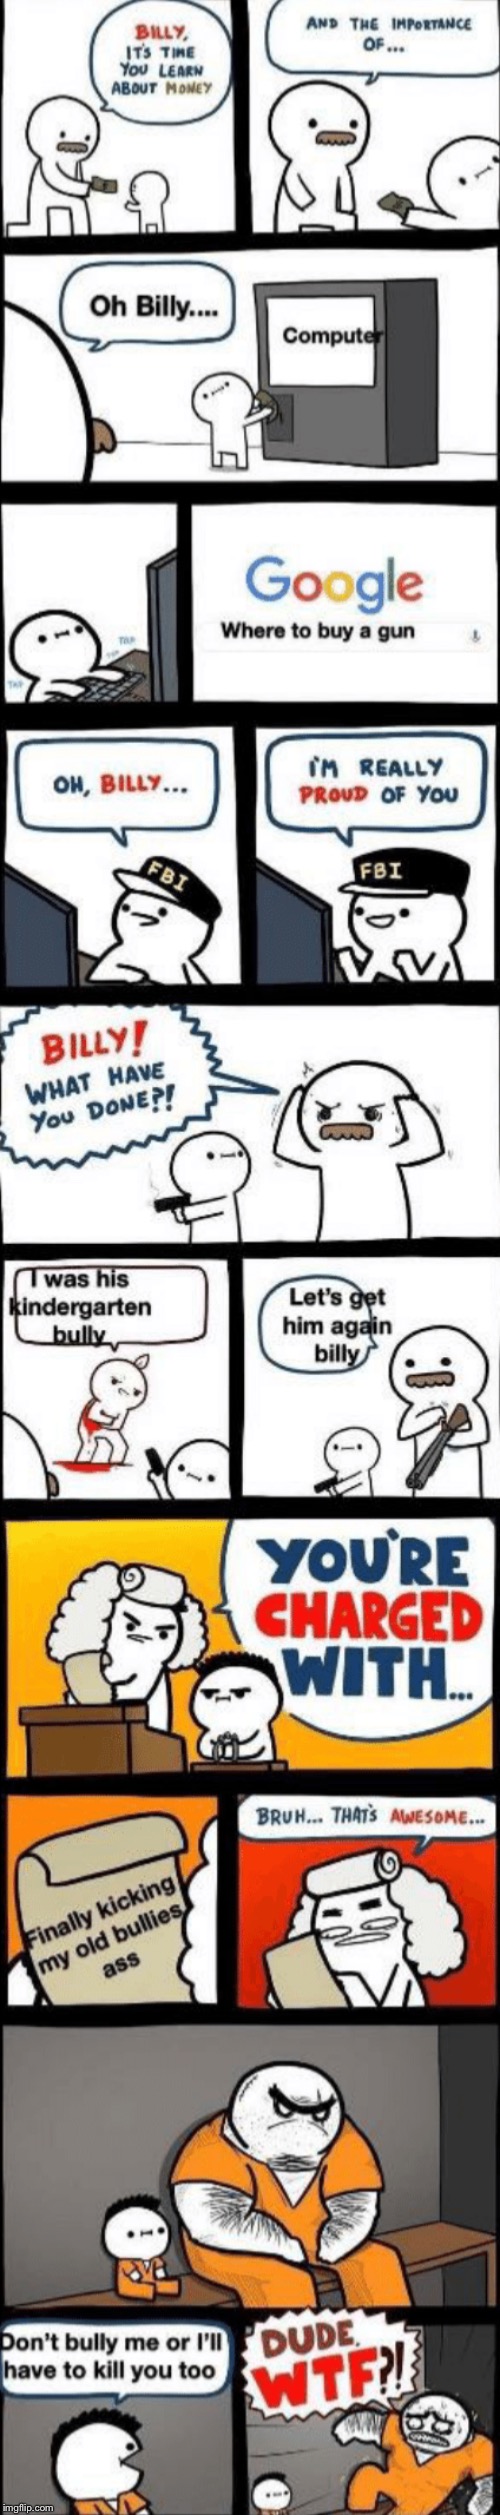 Billy meme story | image tagged in memes,billy learning about money,billy's fbi agent,billy what have you done | made w/ Imgflip meme maker